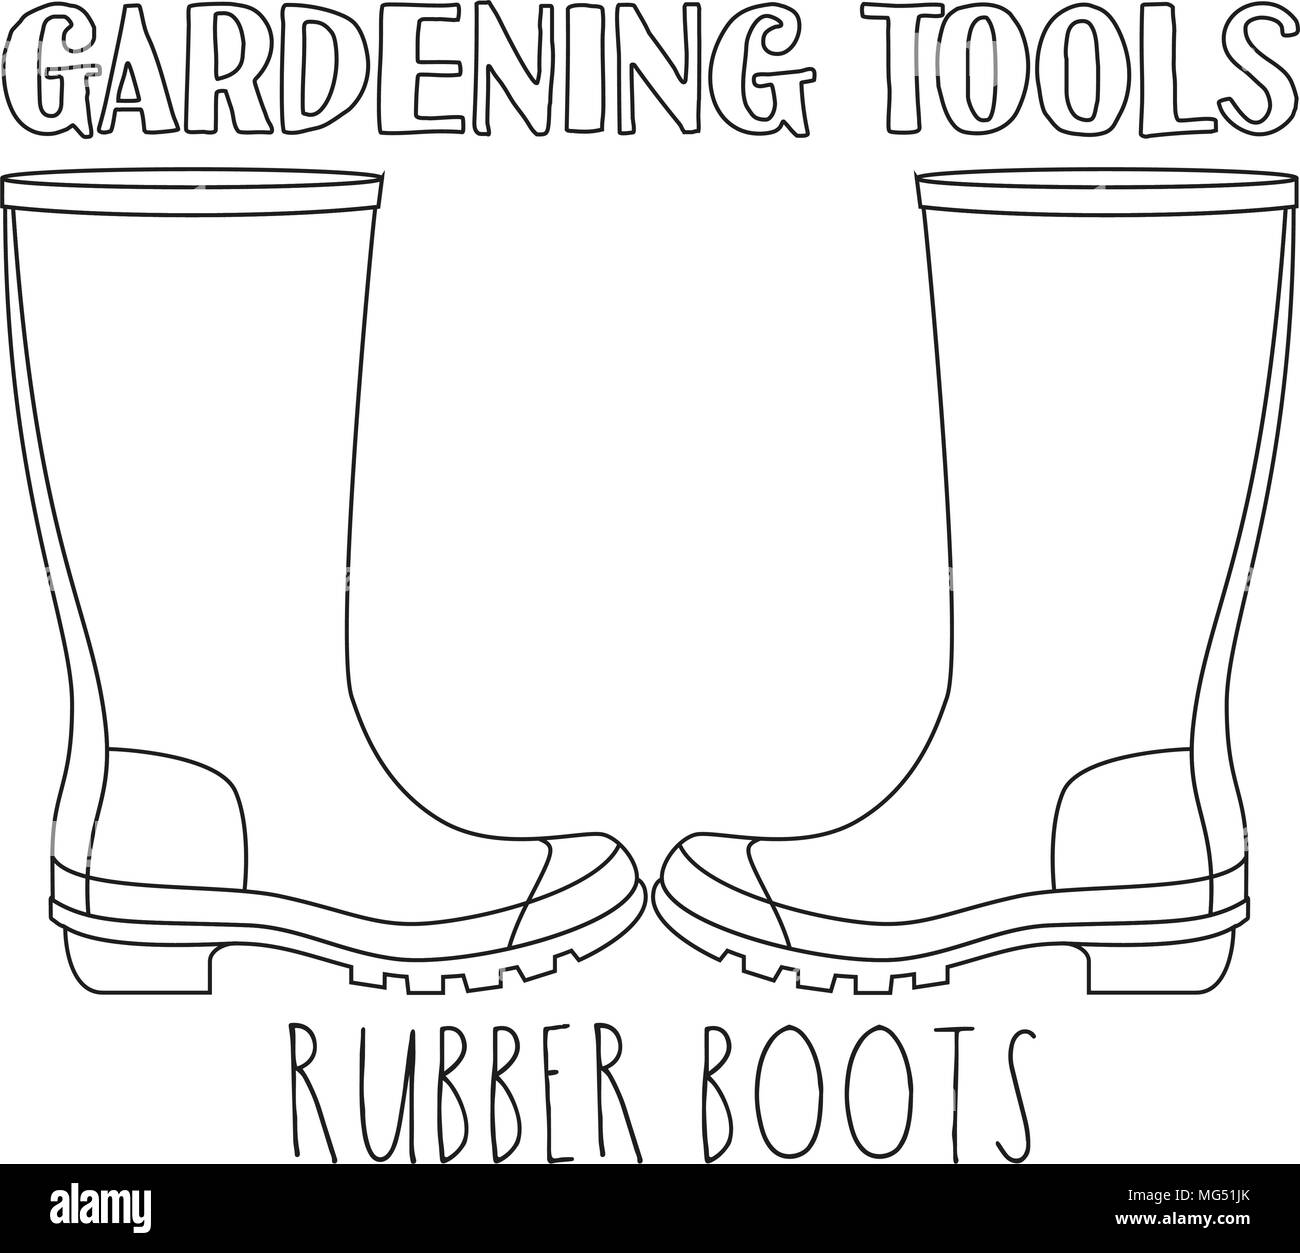 Line art black and white rubber boots coloring book page for adults and kids garden tool vector illustration for gift card certificate sticker badg stock vector image art